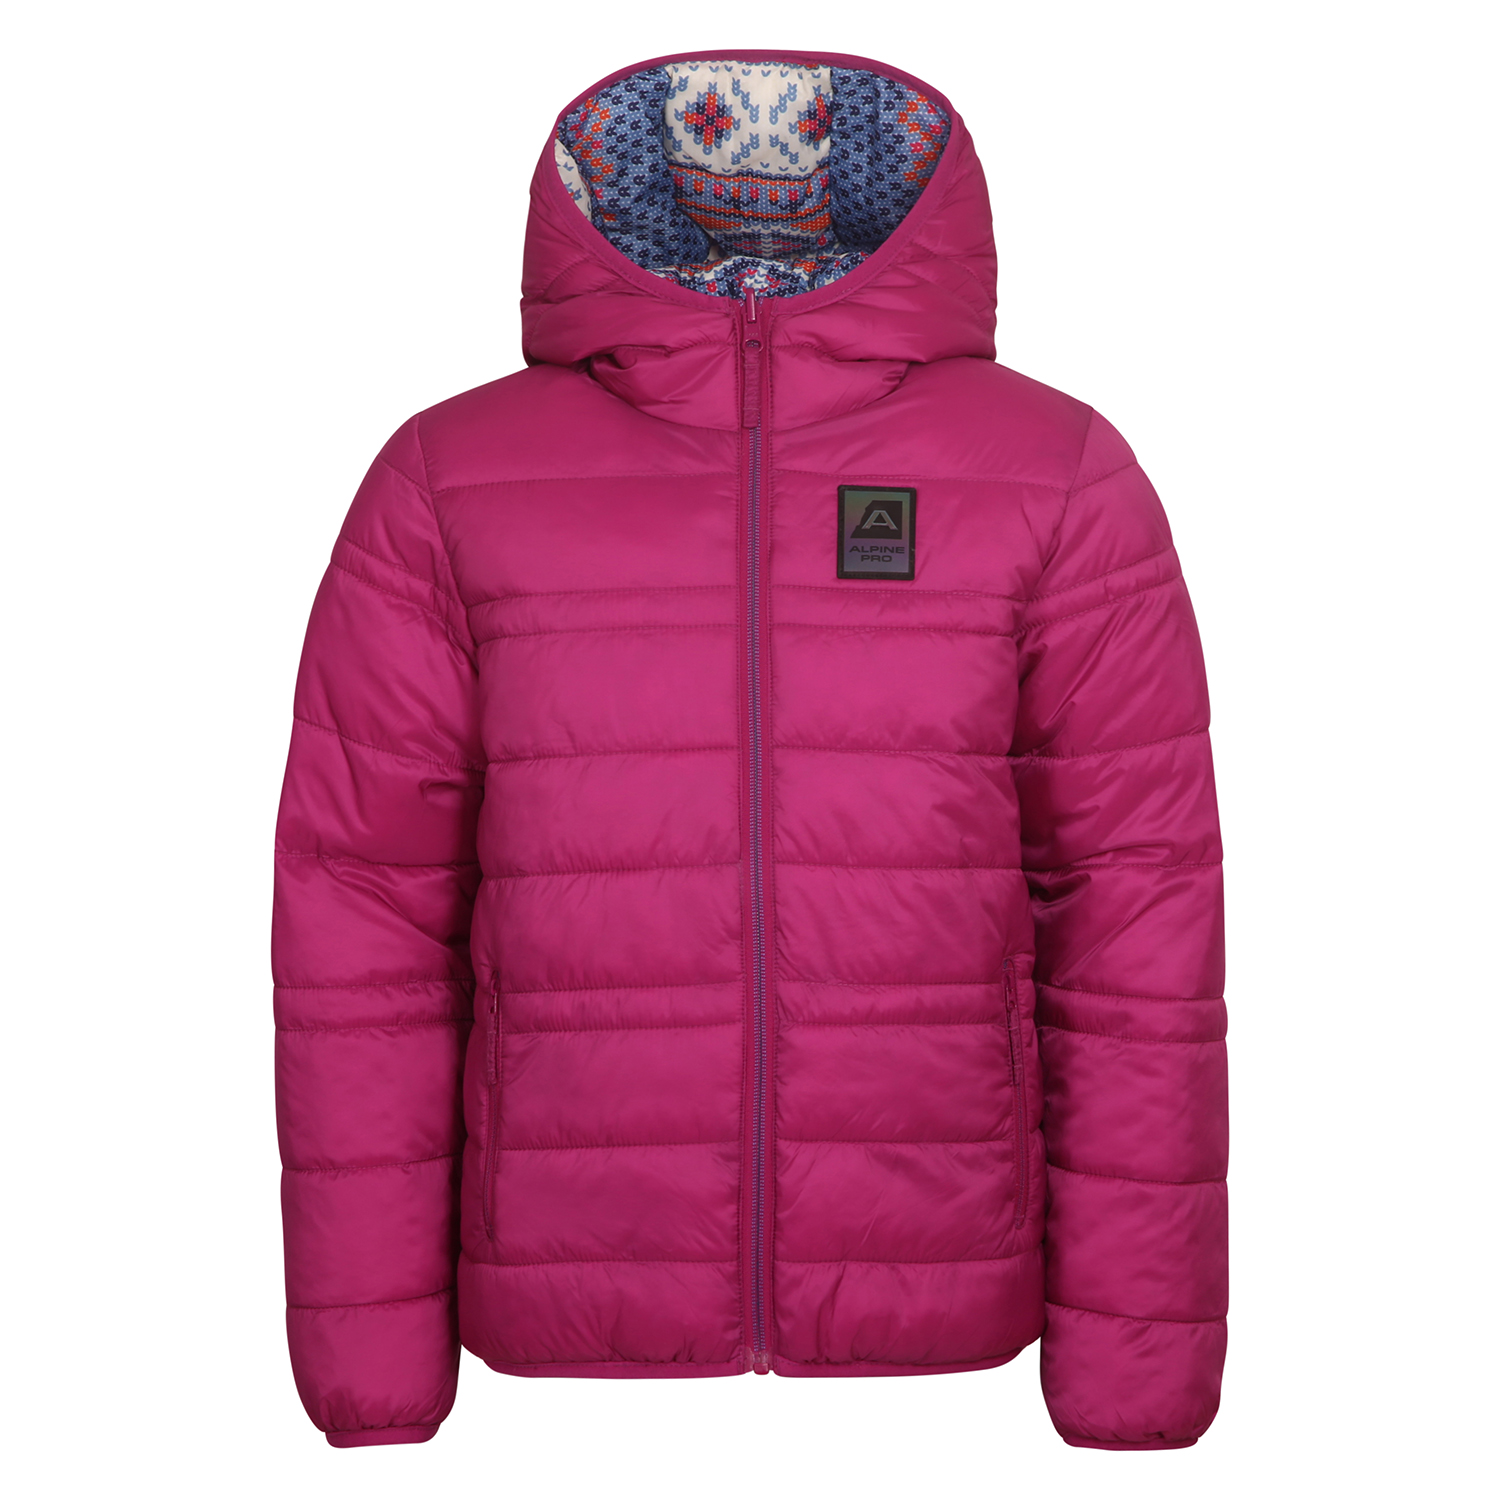 Kids Double-sided Jacket Hi-therm ALPINE PRO MICHRO Fuchsia Red Variant PA